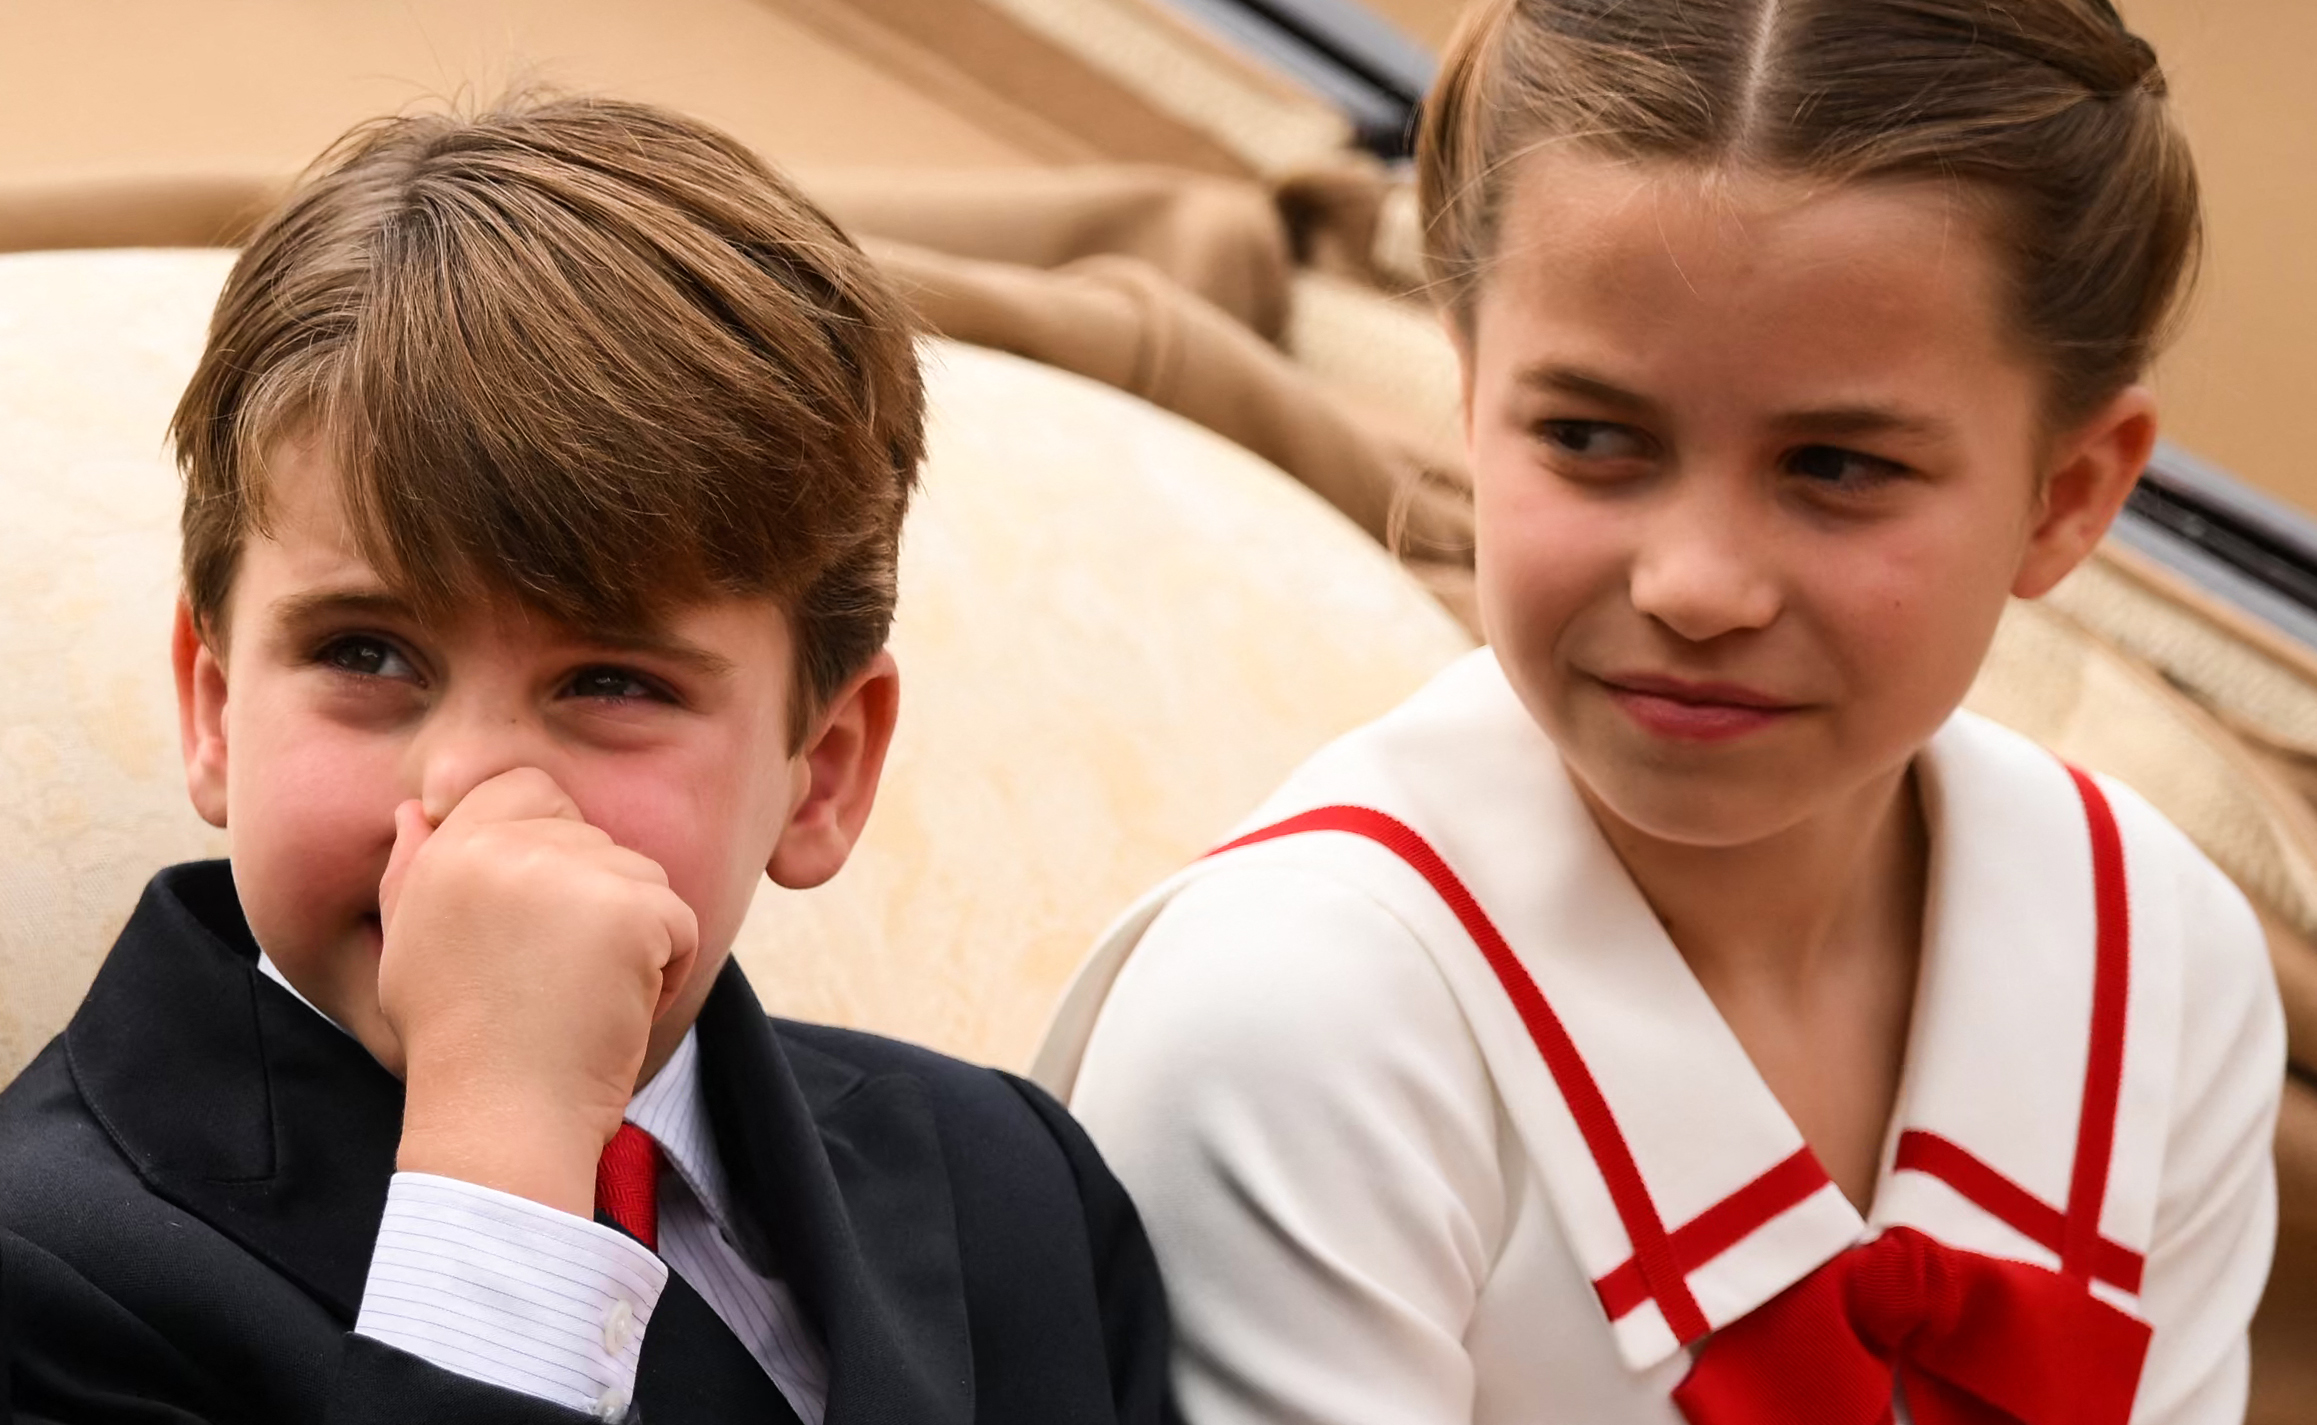 <p><span>Princess Charlotte gave little brother Prince Louis a look as he held his nose while riding in a carriage during </span><a href="https://www.wonderwall.com/celebrity/royals/trooping-the-colour-2023-king-charles-iii-celebrates-the-first-of-his-reign-752078.gallery">Trooping the Colour</a><span> in London on June 17, 2023.</span></p>